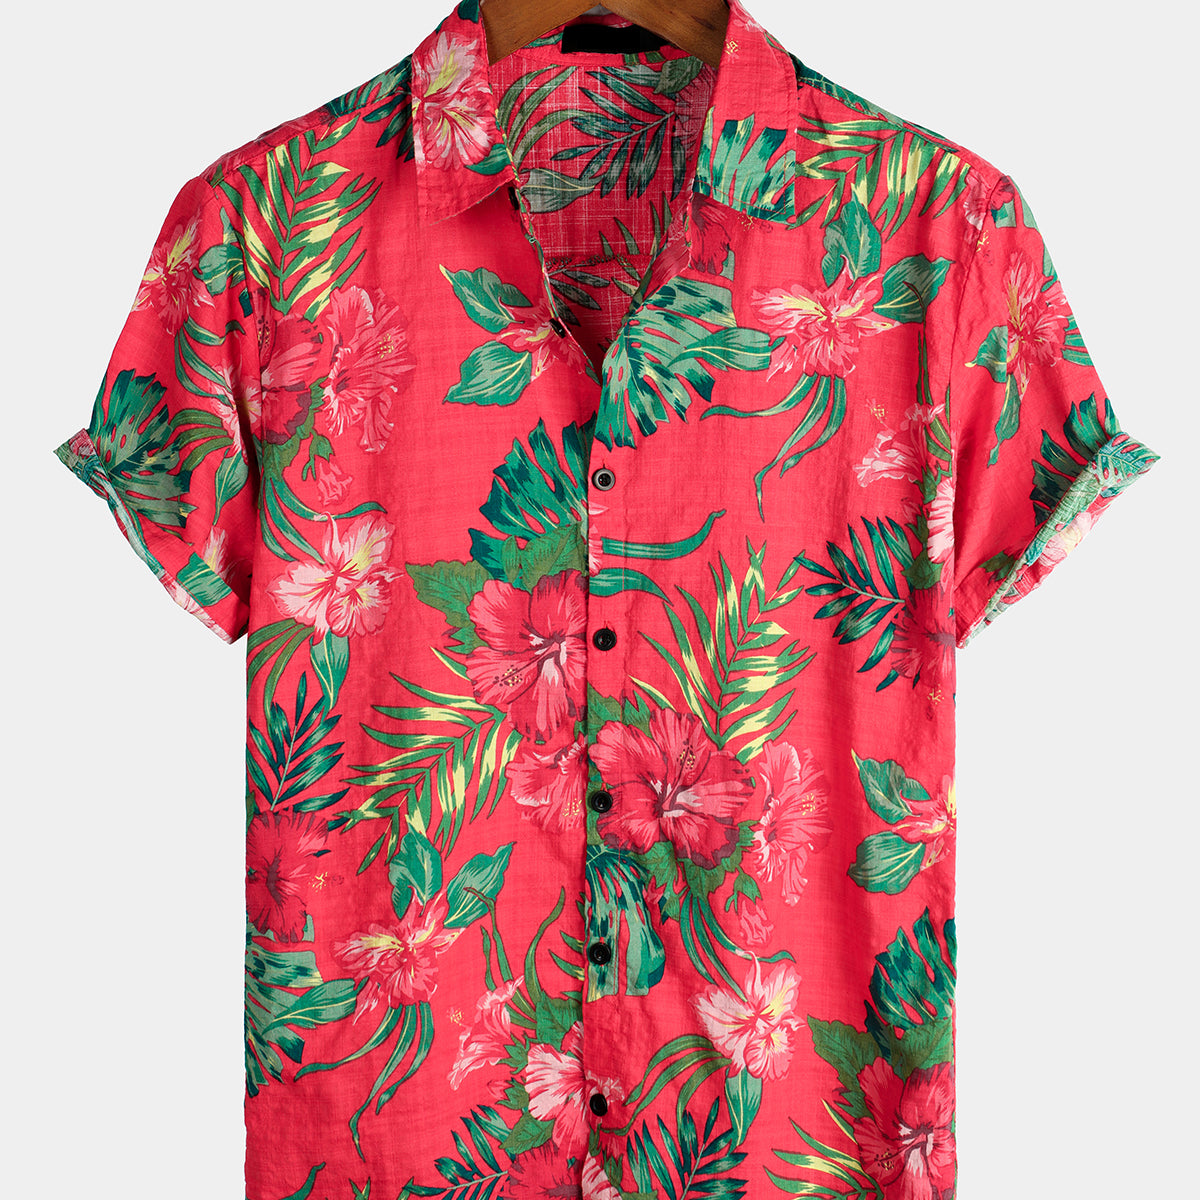 Men's Floral Tropical Hawaii Cotton Red Shirt